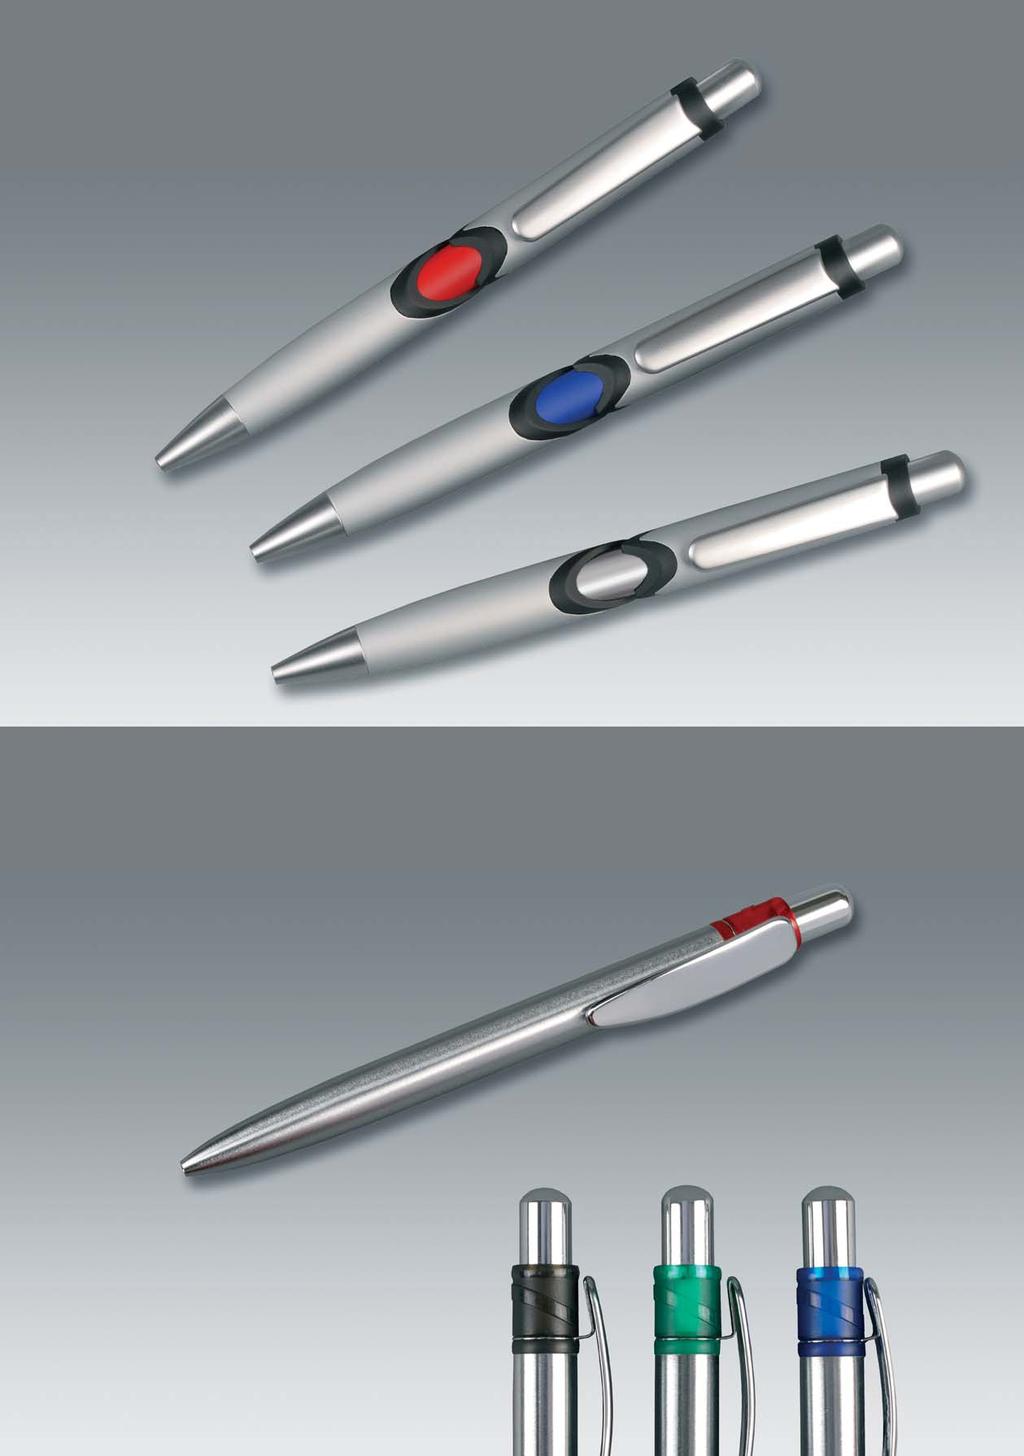 New Article 500/KS Hi-Tech: metal ball pen in silver, int. metal refill, blue ink. colors of the centerpiece:red, blue and silver advertising: h Patent registratation certificate: Nr.